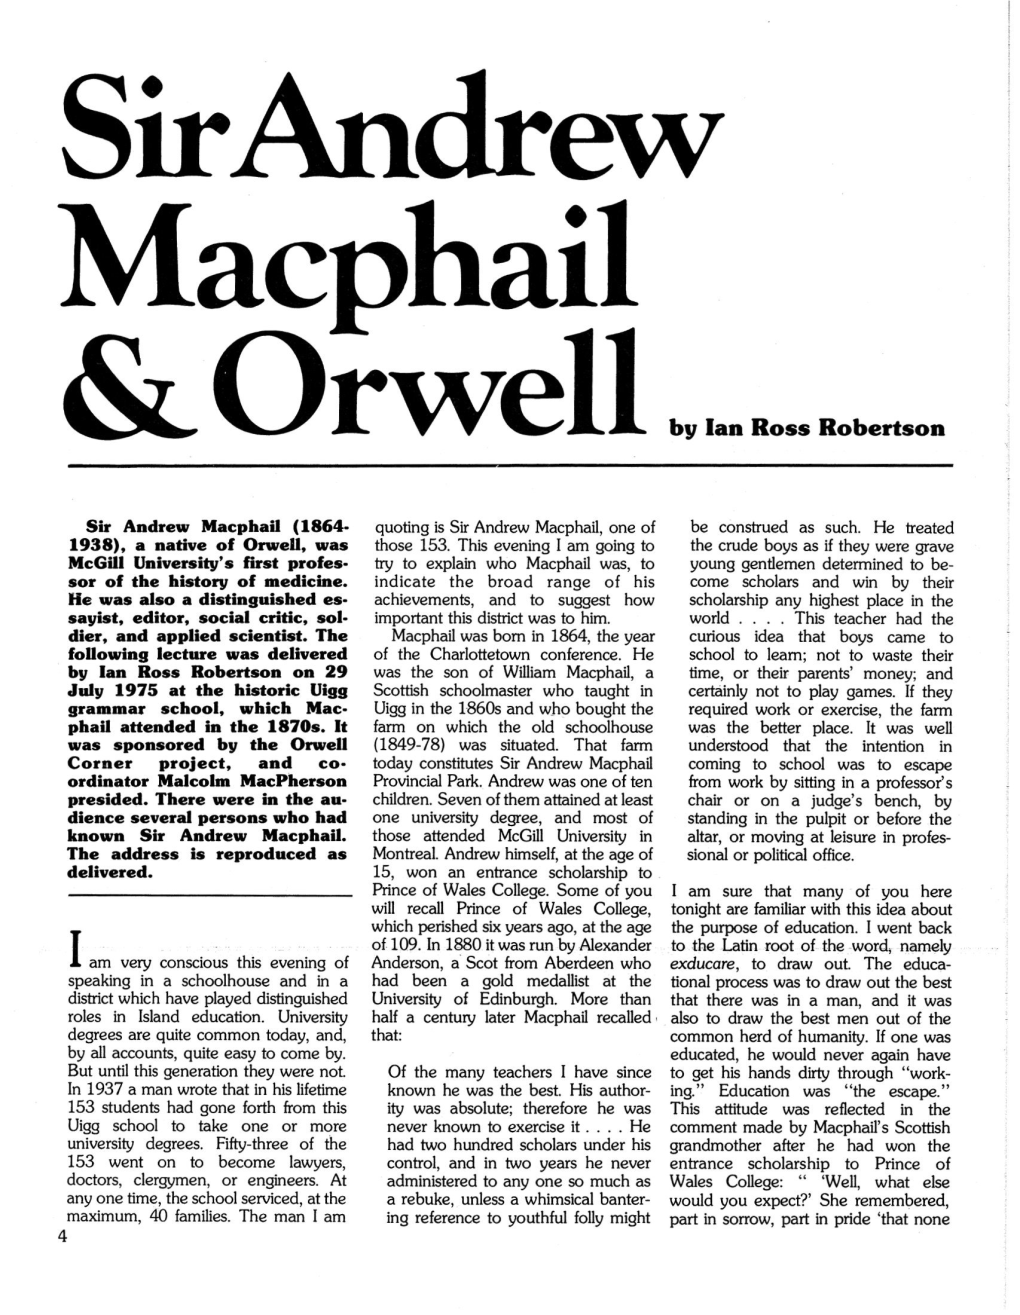 Sir Andrew Macphail & Orwell by Ian Ross Robertson